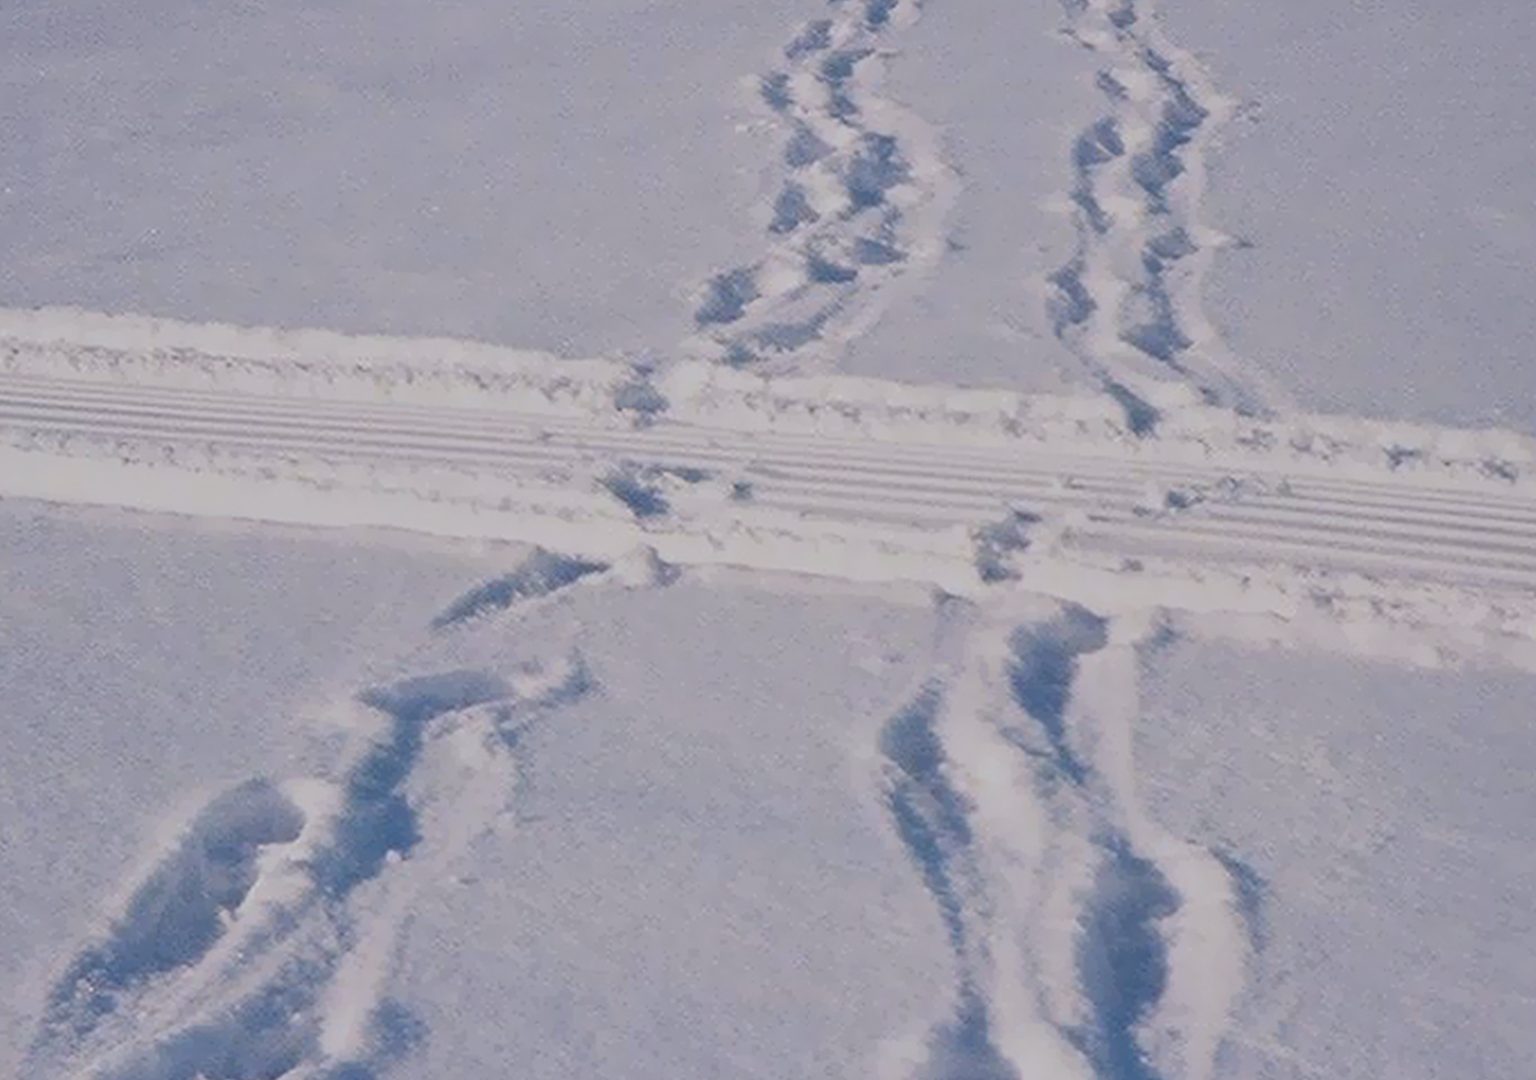 Two sets of footprints recede into background over frozen, snow-covered lake while people can be seen far in the distance